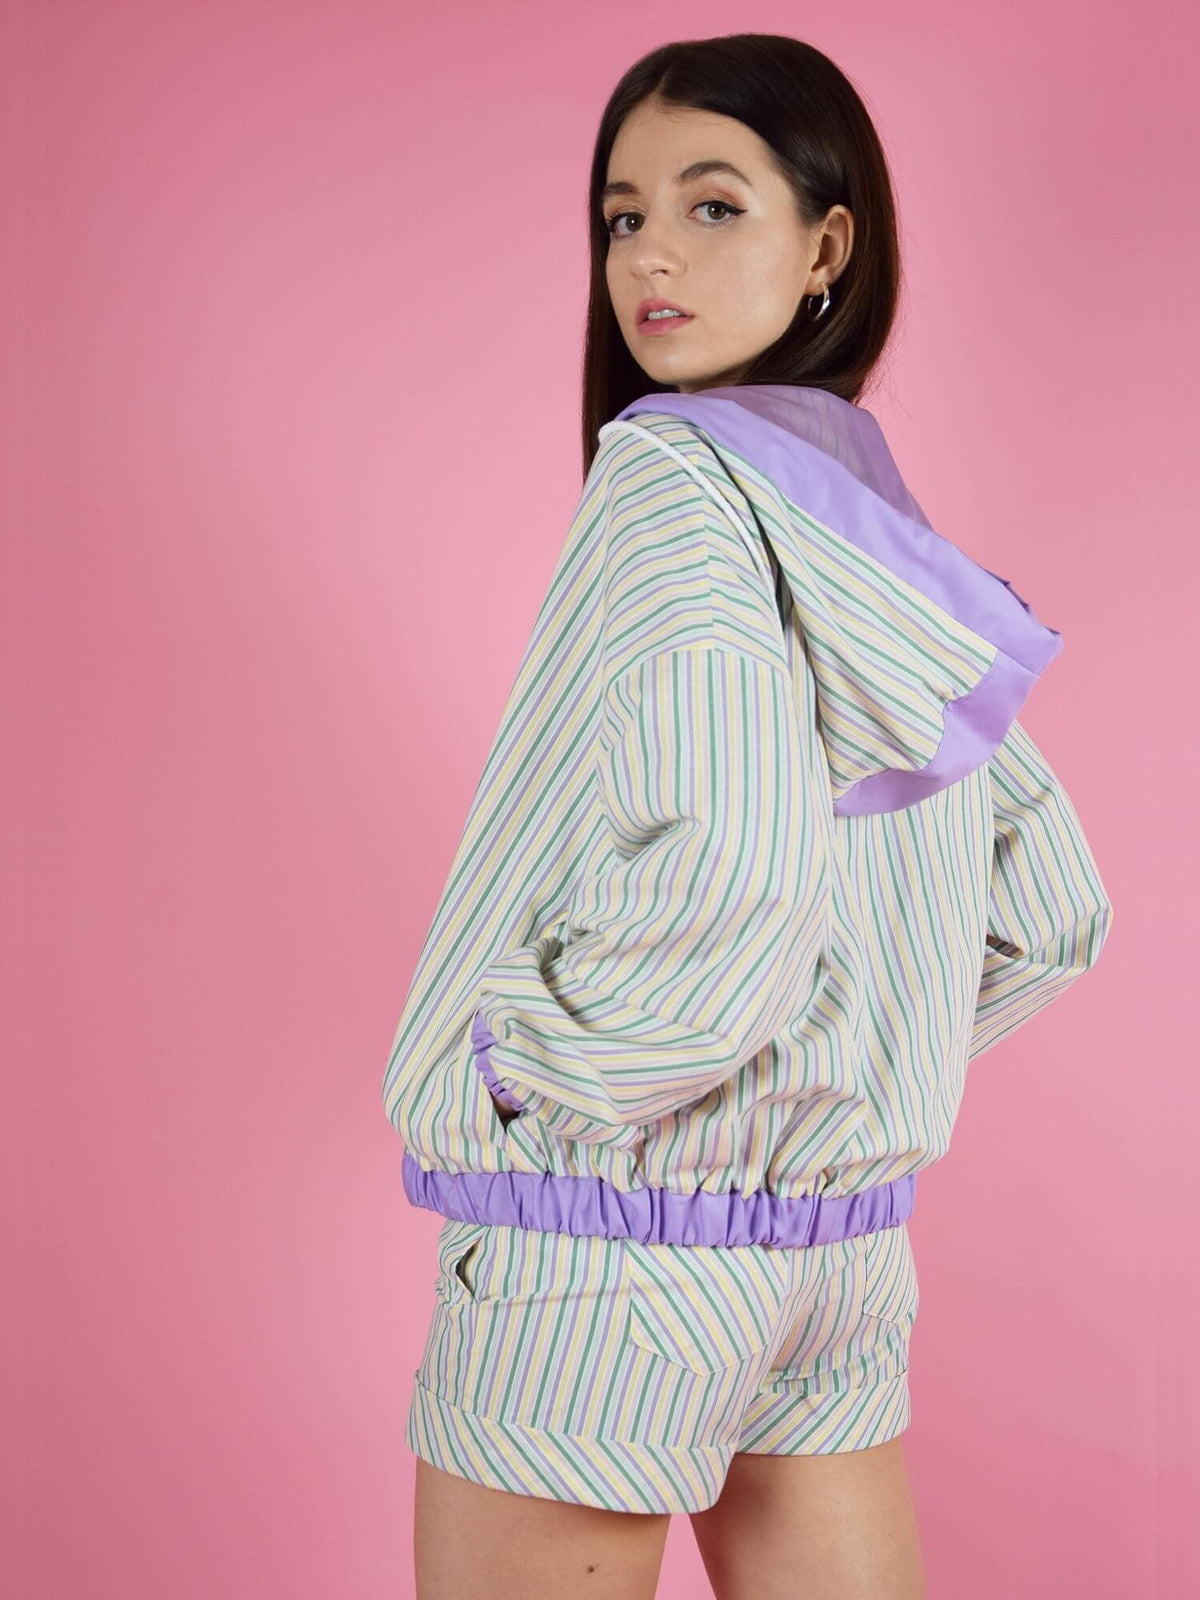 Bonfire Bomber Light Spring Jacket, Upcycled Cotton, in Colourful Stripe